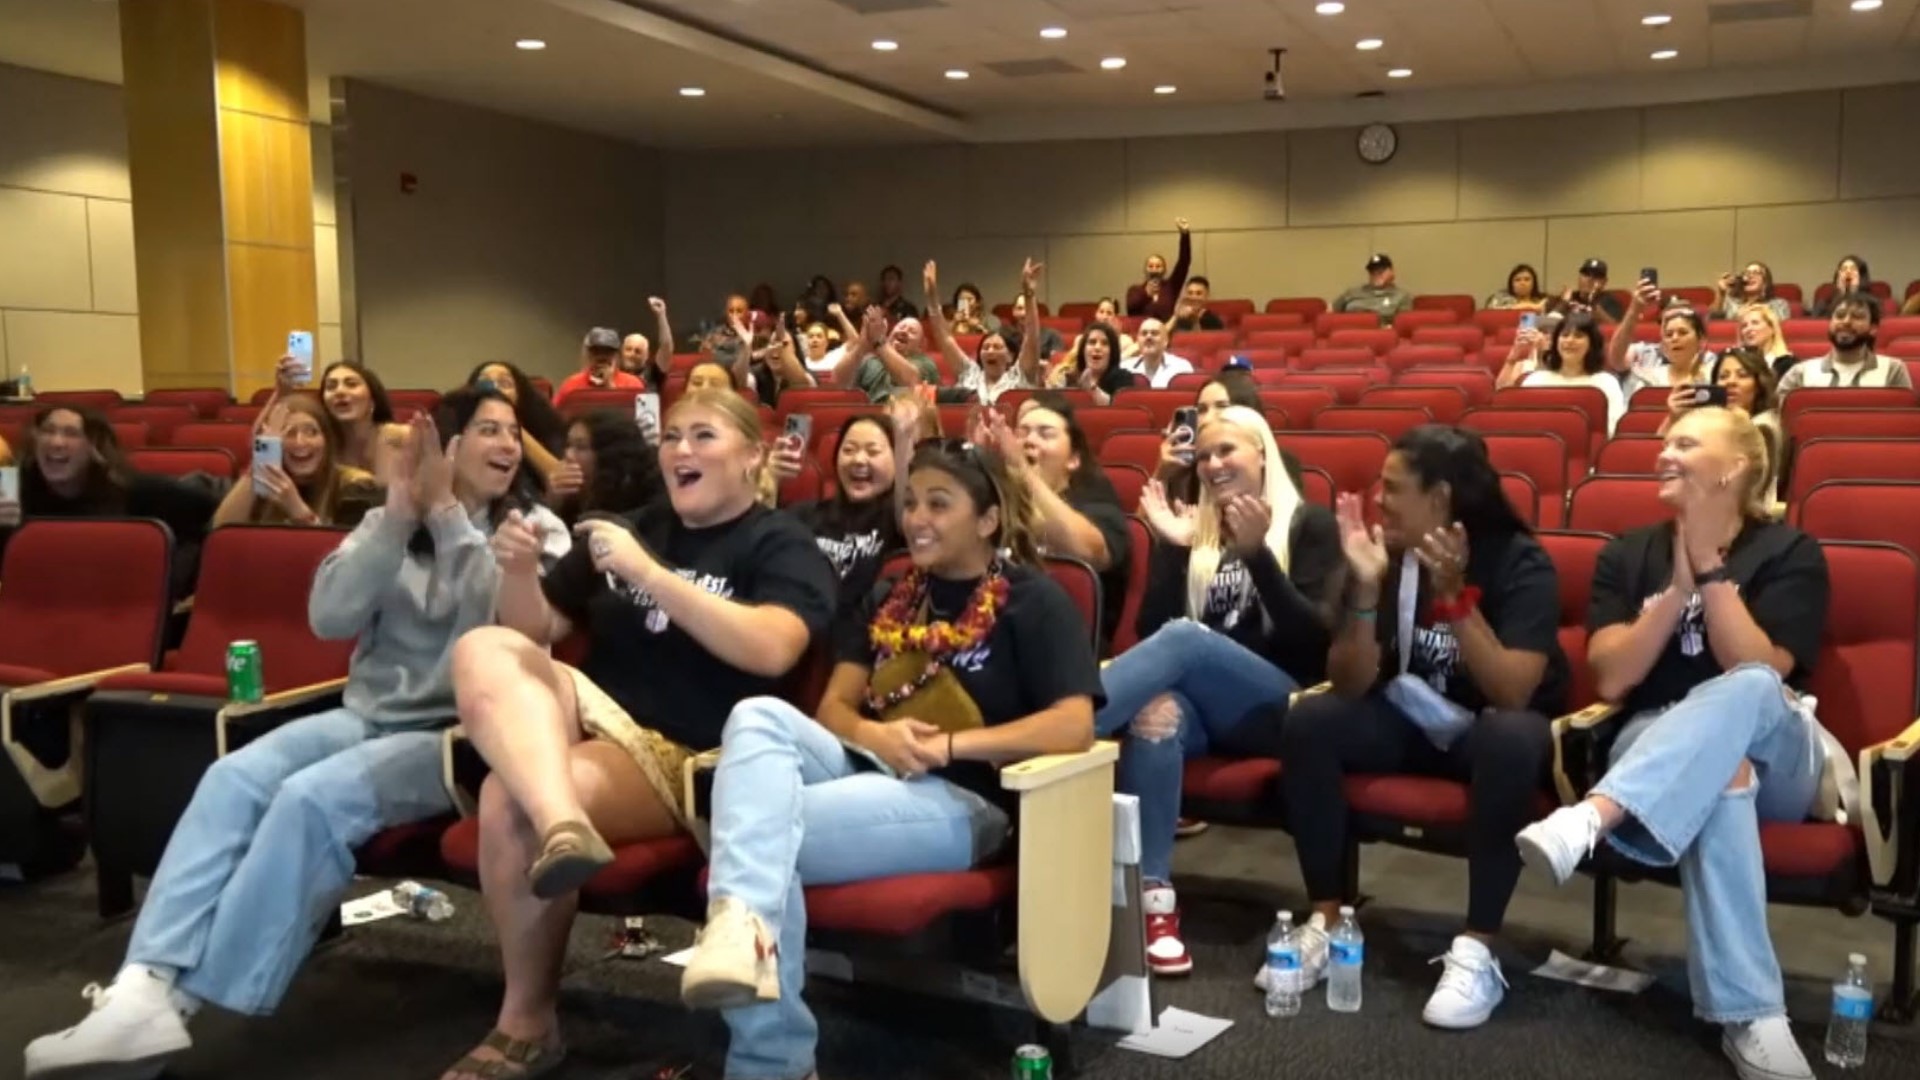 The Aztecs Softball team is back in the NCAA Tournament for the 10th time in 15 years, facing a tough road to Super Regional.